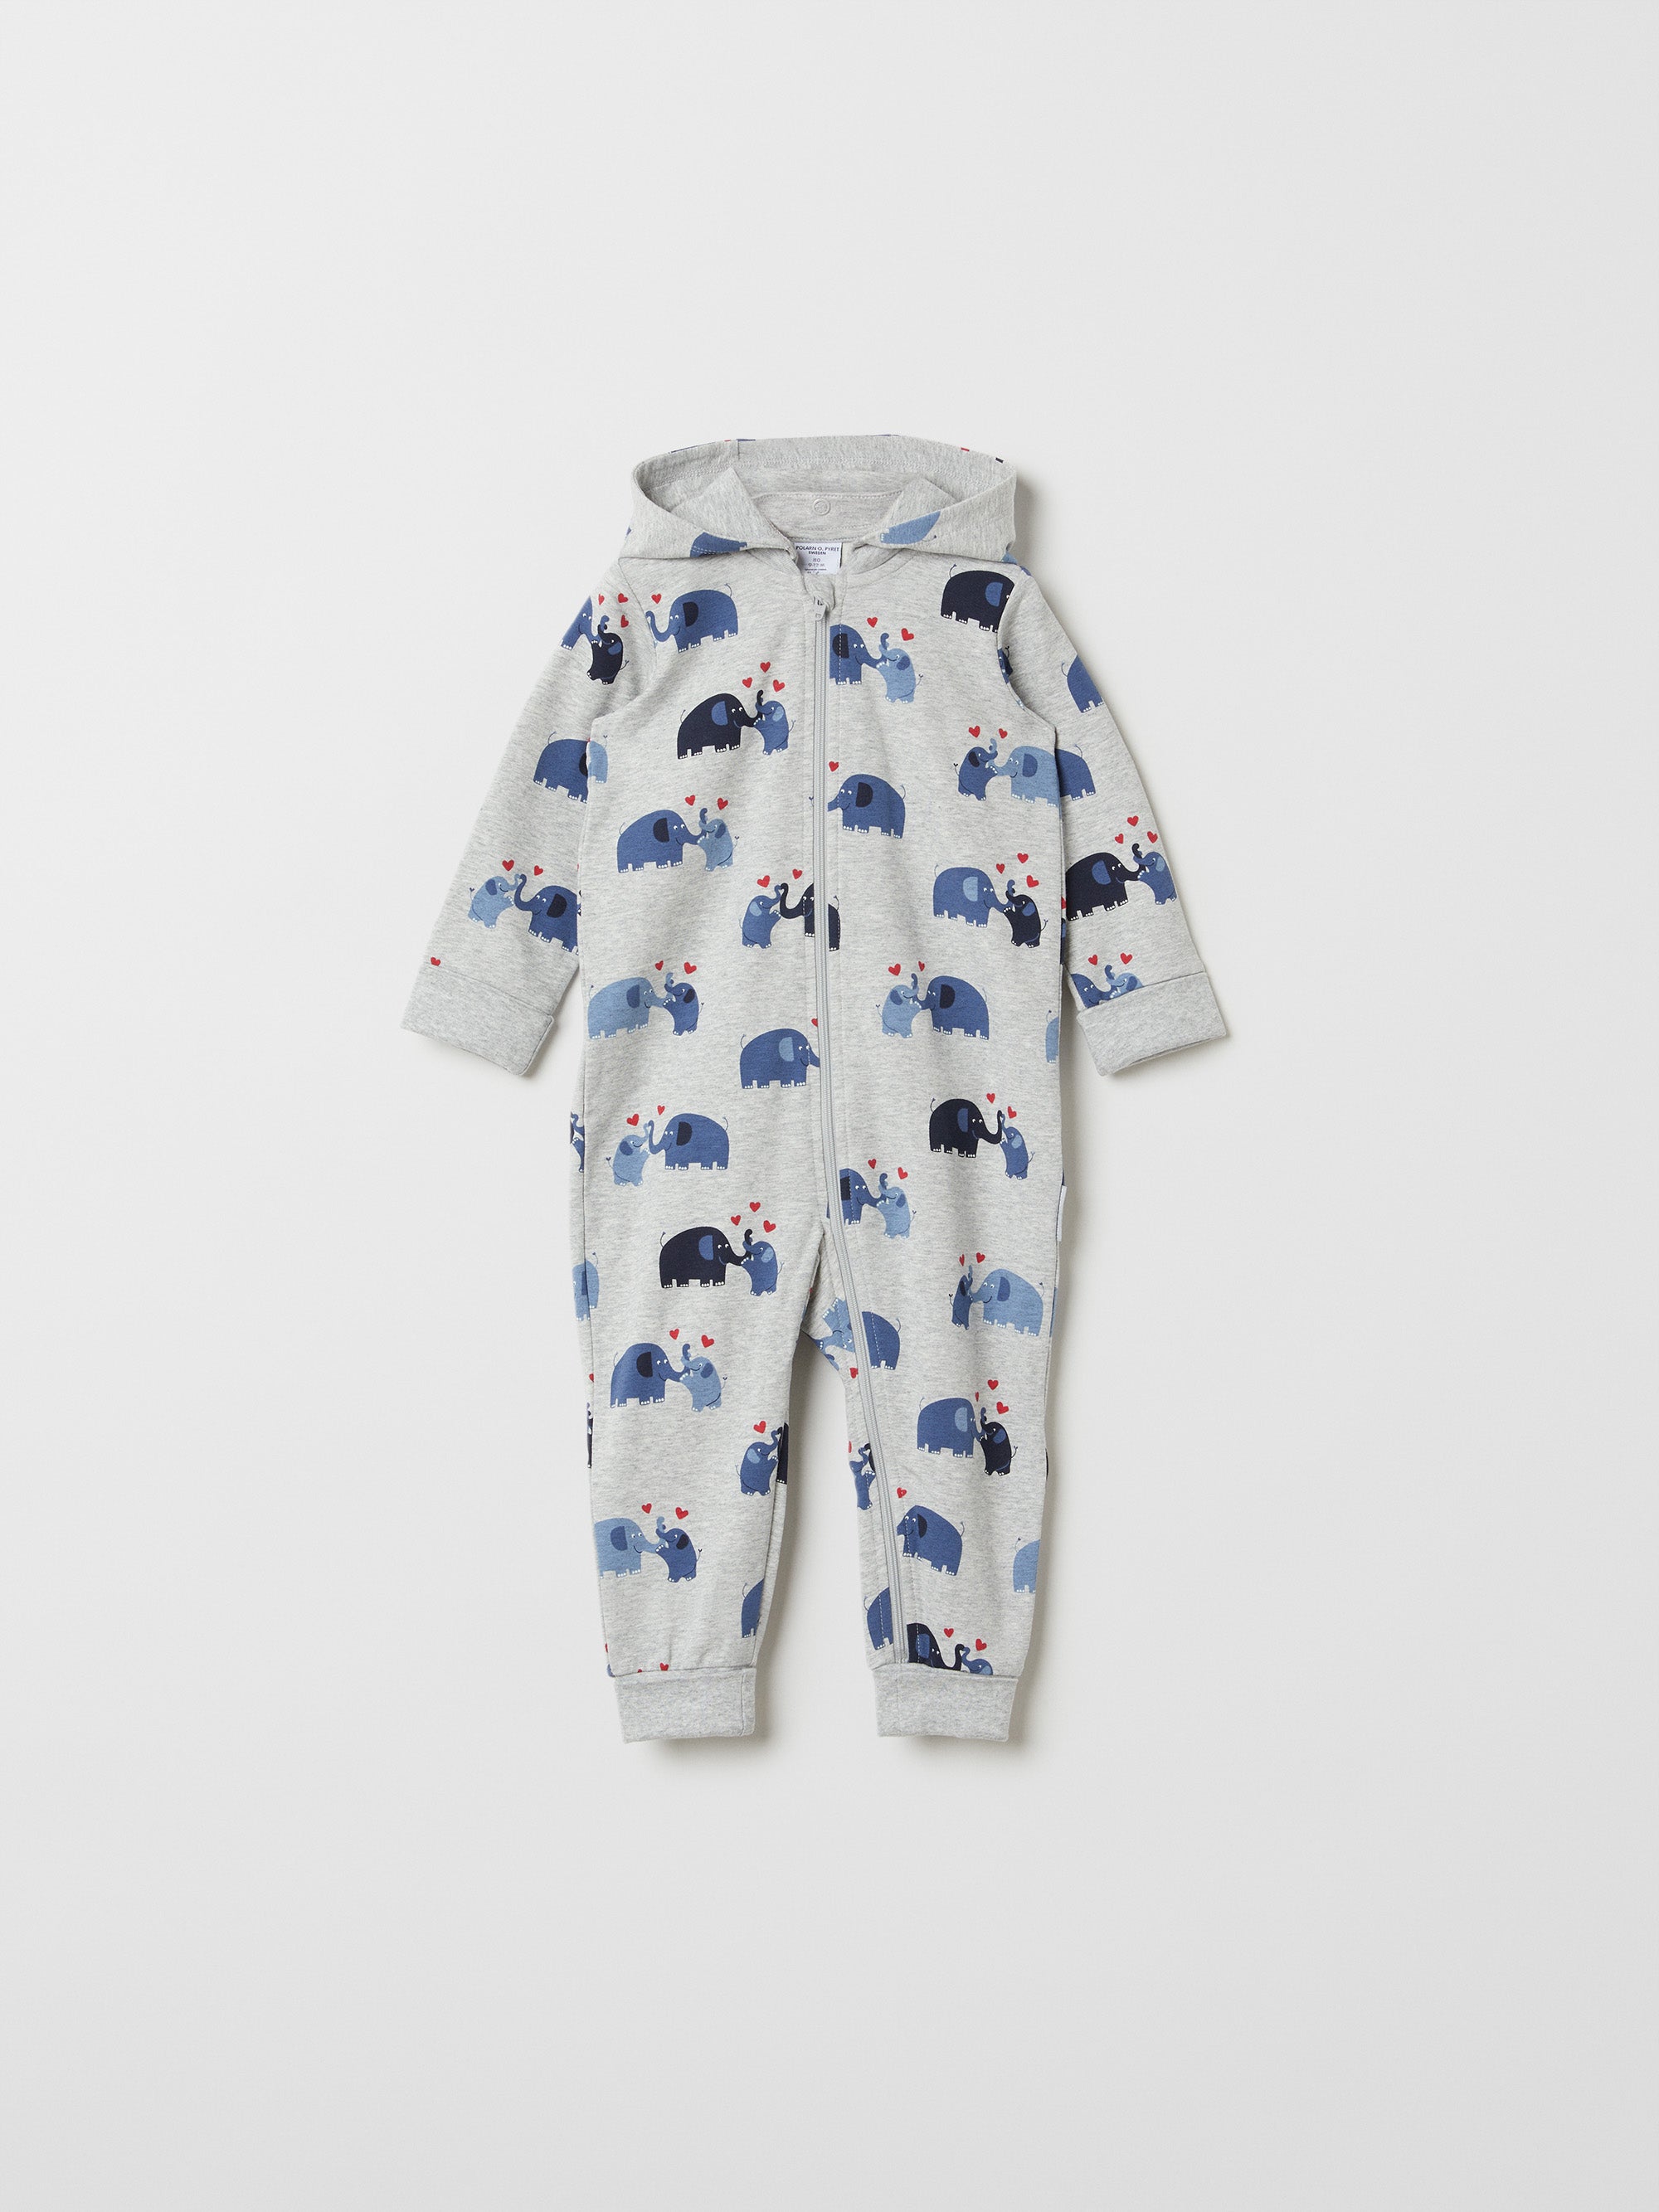 Elephants & Hearts Baby All-in-one